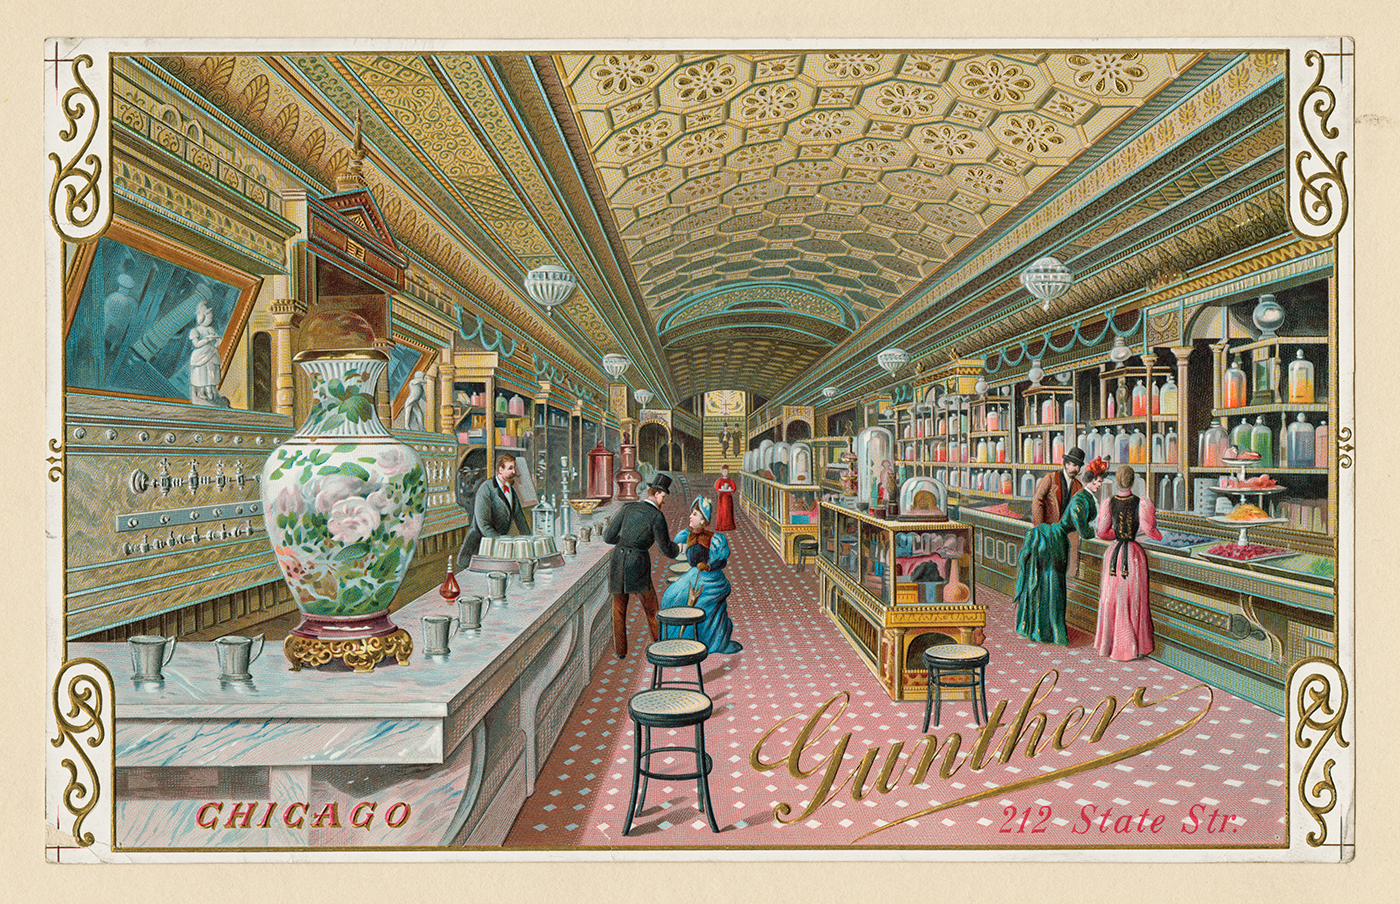 Color illustration depicting Gunther's Store and Soda Fountain located at 212 State Street, Chicago, Illinois, circa 1887. Credit: Chicago History Museum, ICHi-021804 